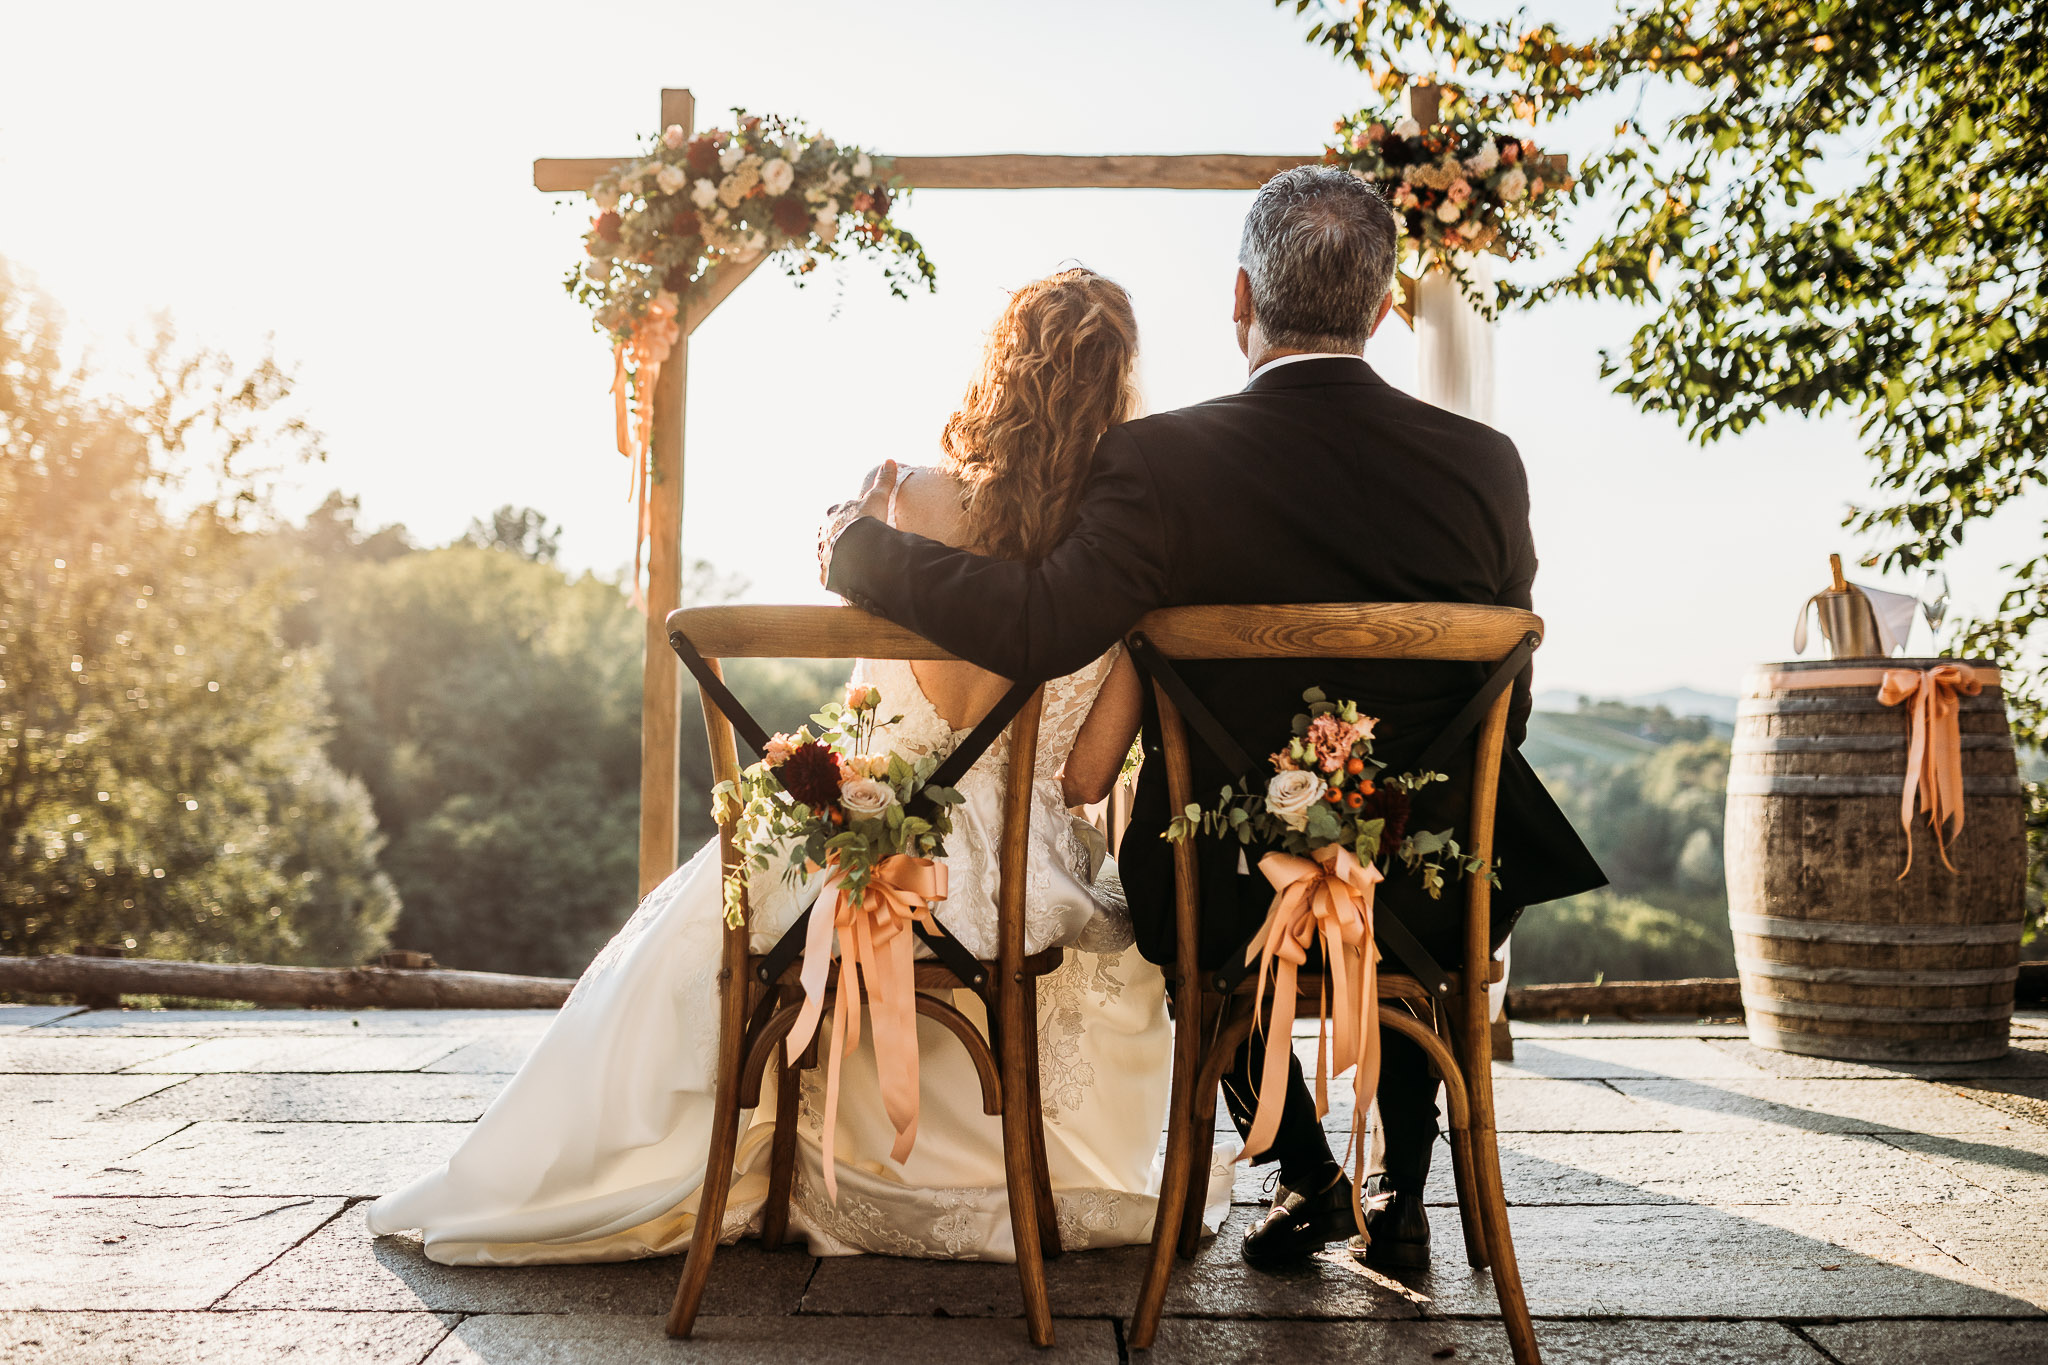 Couple eloping in Piedmont enjoys their sunset ceremony